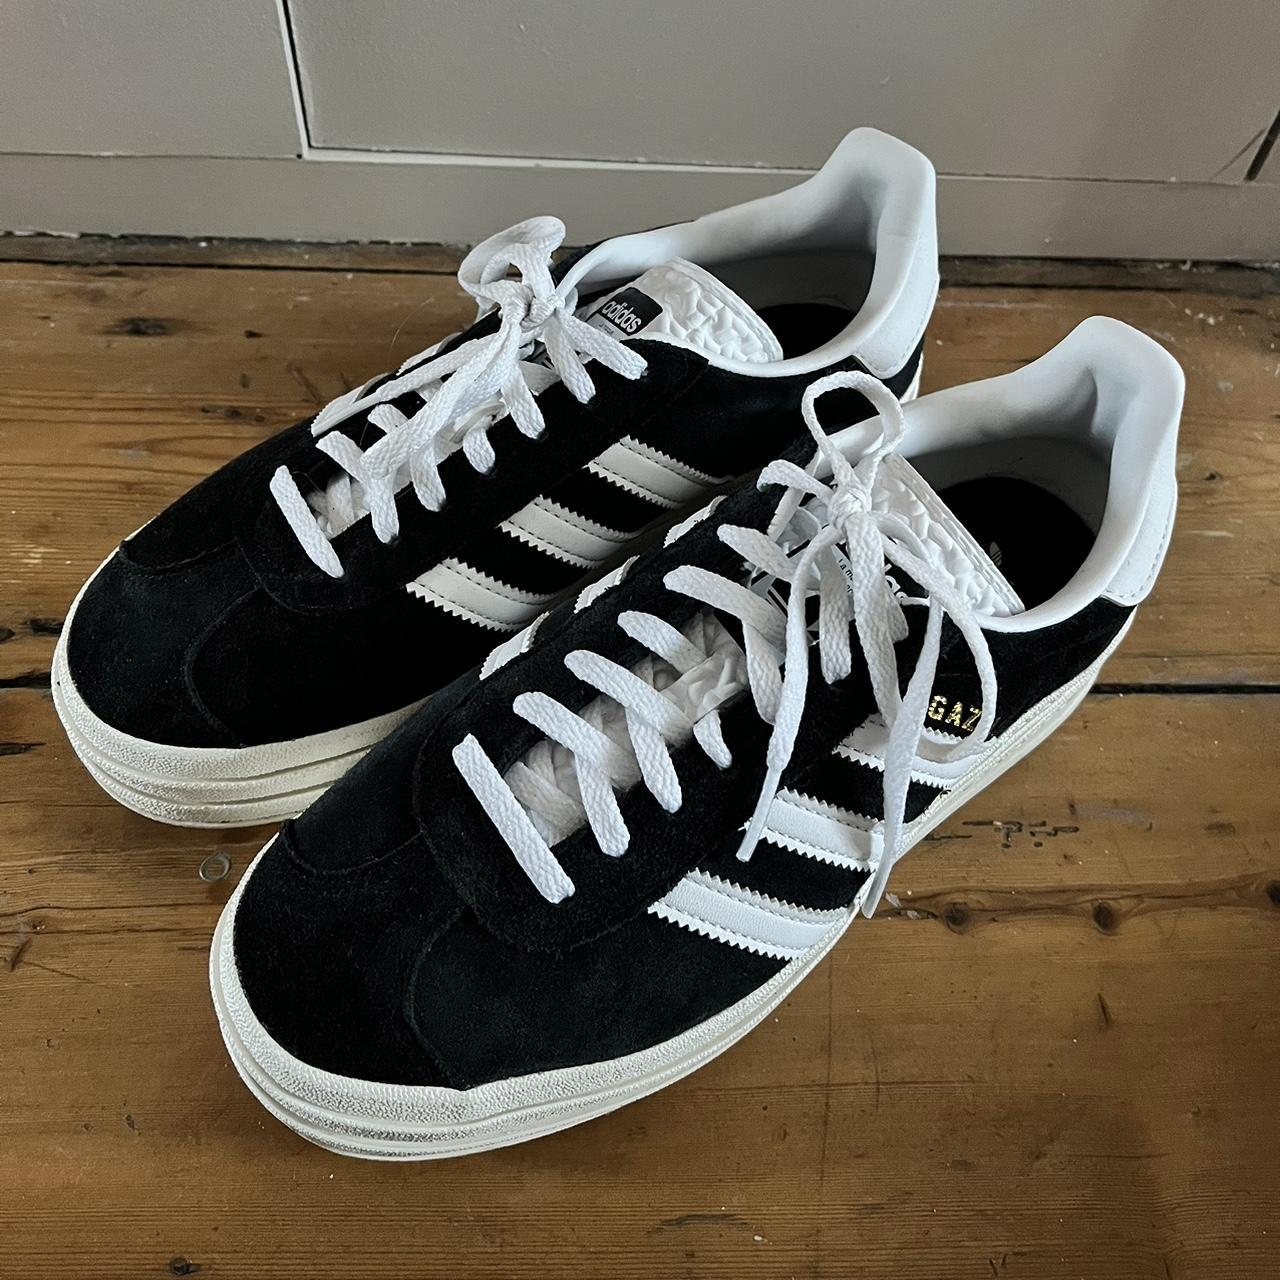 Adidas gazelle platforms in black and white, only... - Depop